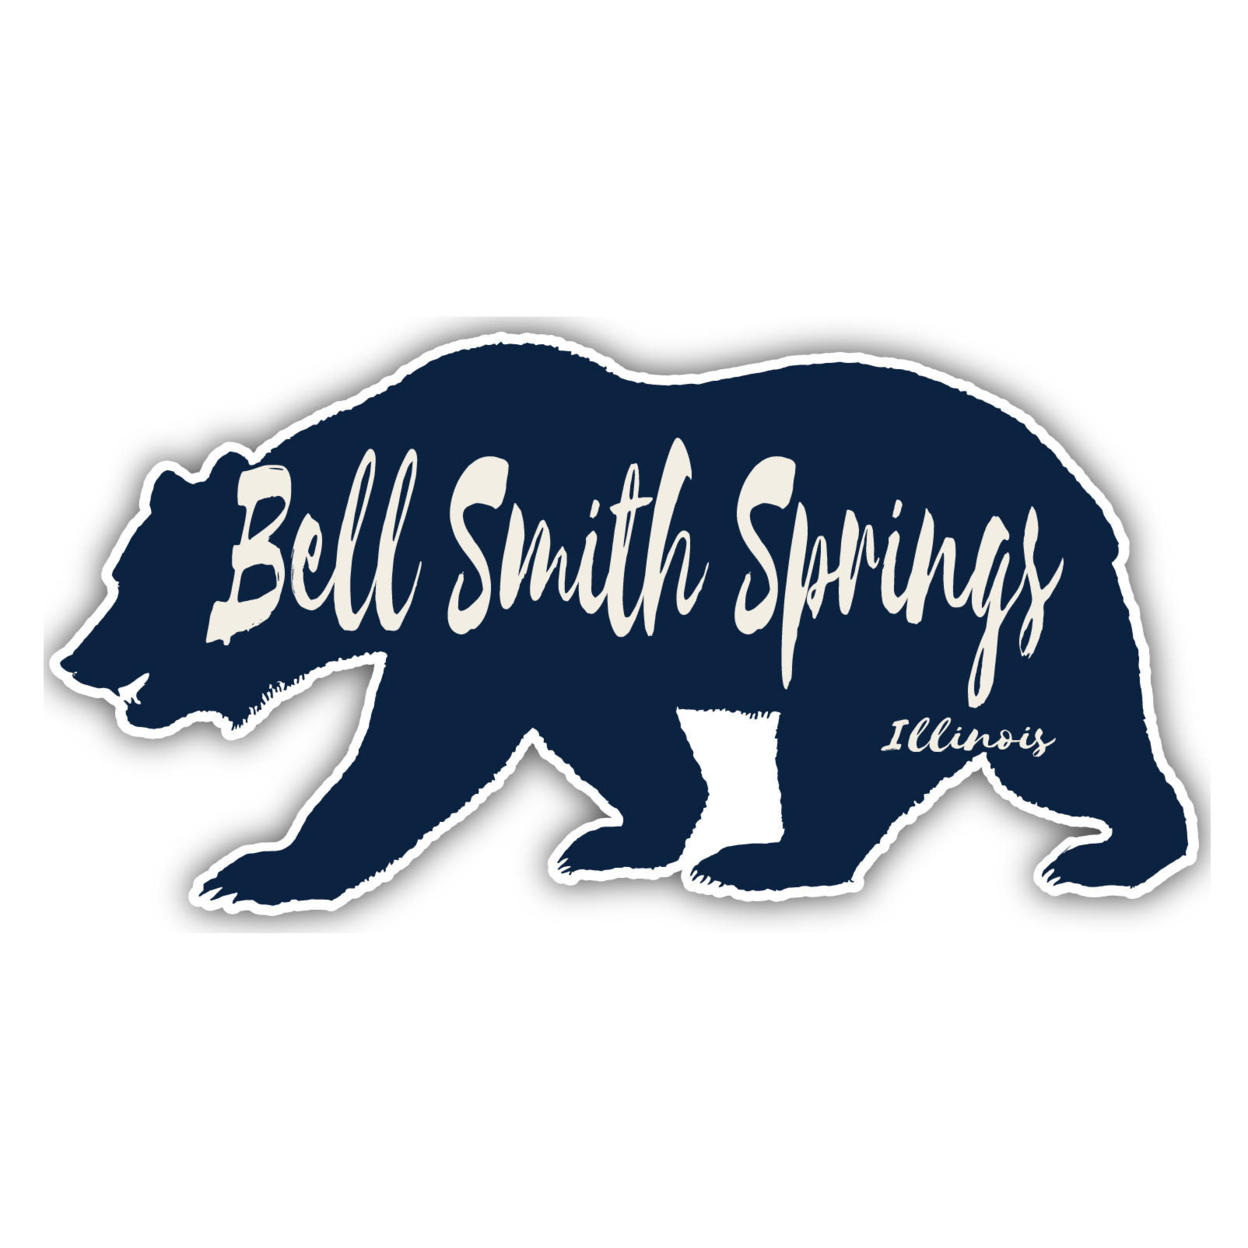 Bell Smith Springs Illinois Souvenir Decorative Stickers (Choose Theme And Size) - 4-Pack, 10-Inch, Bear